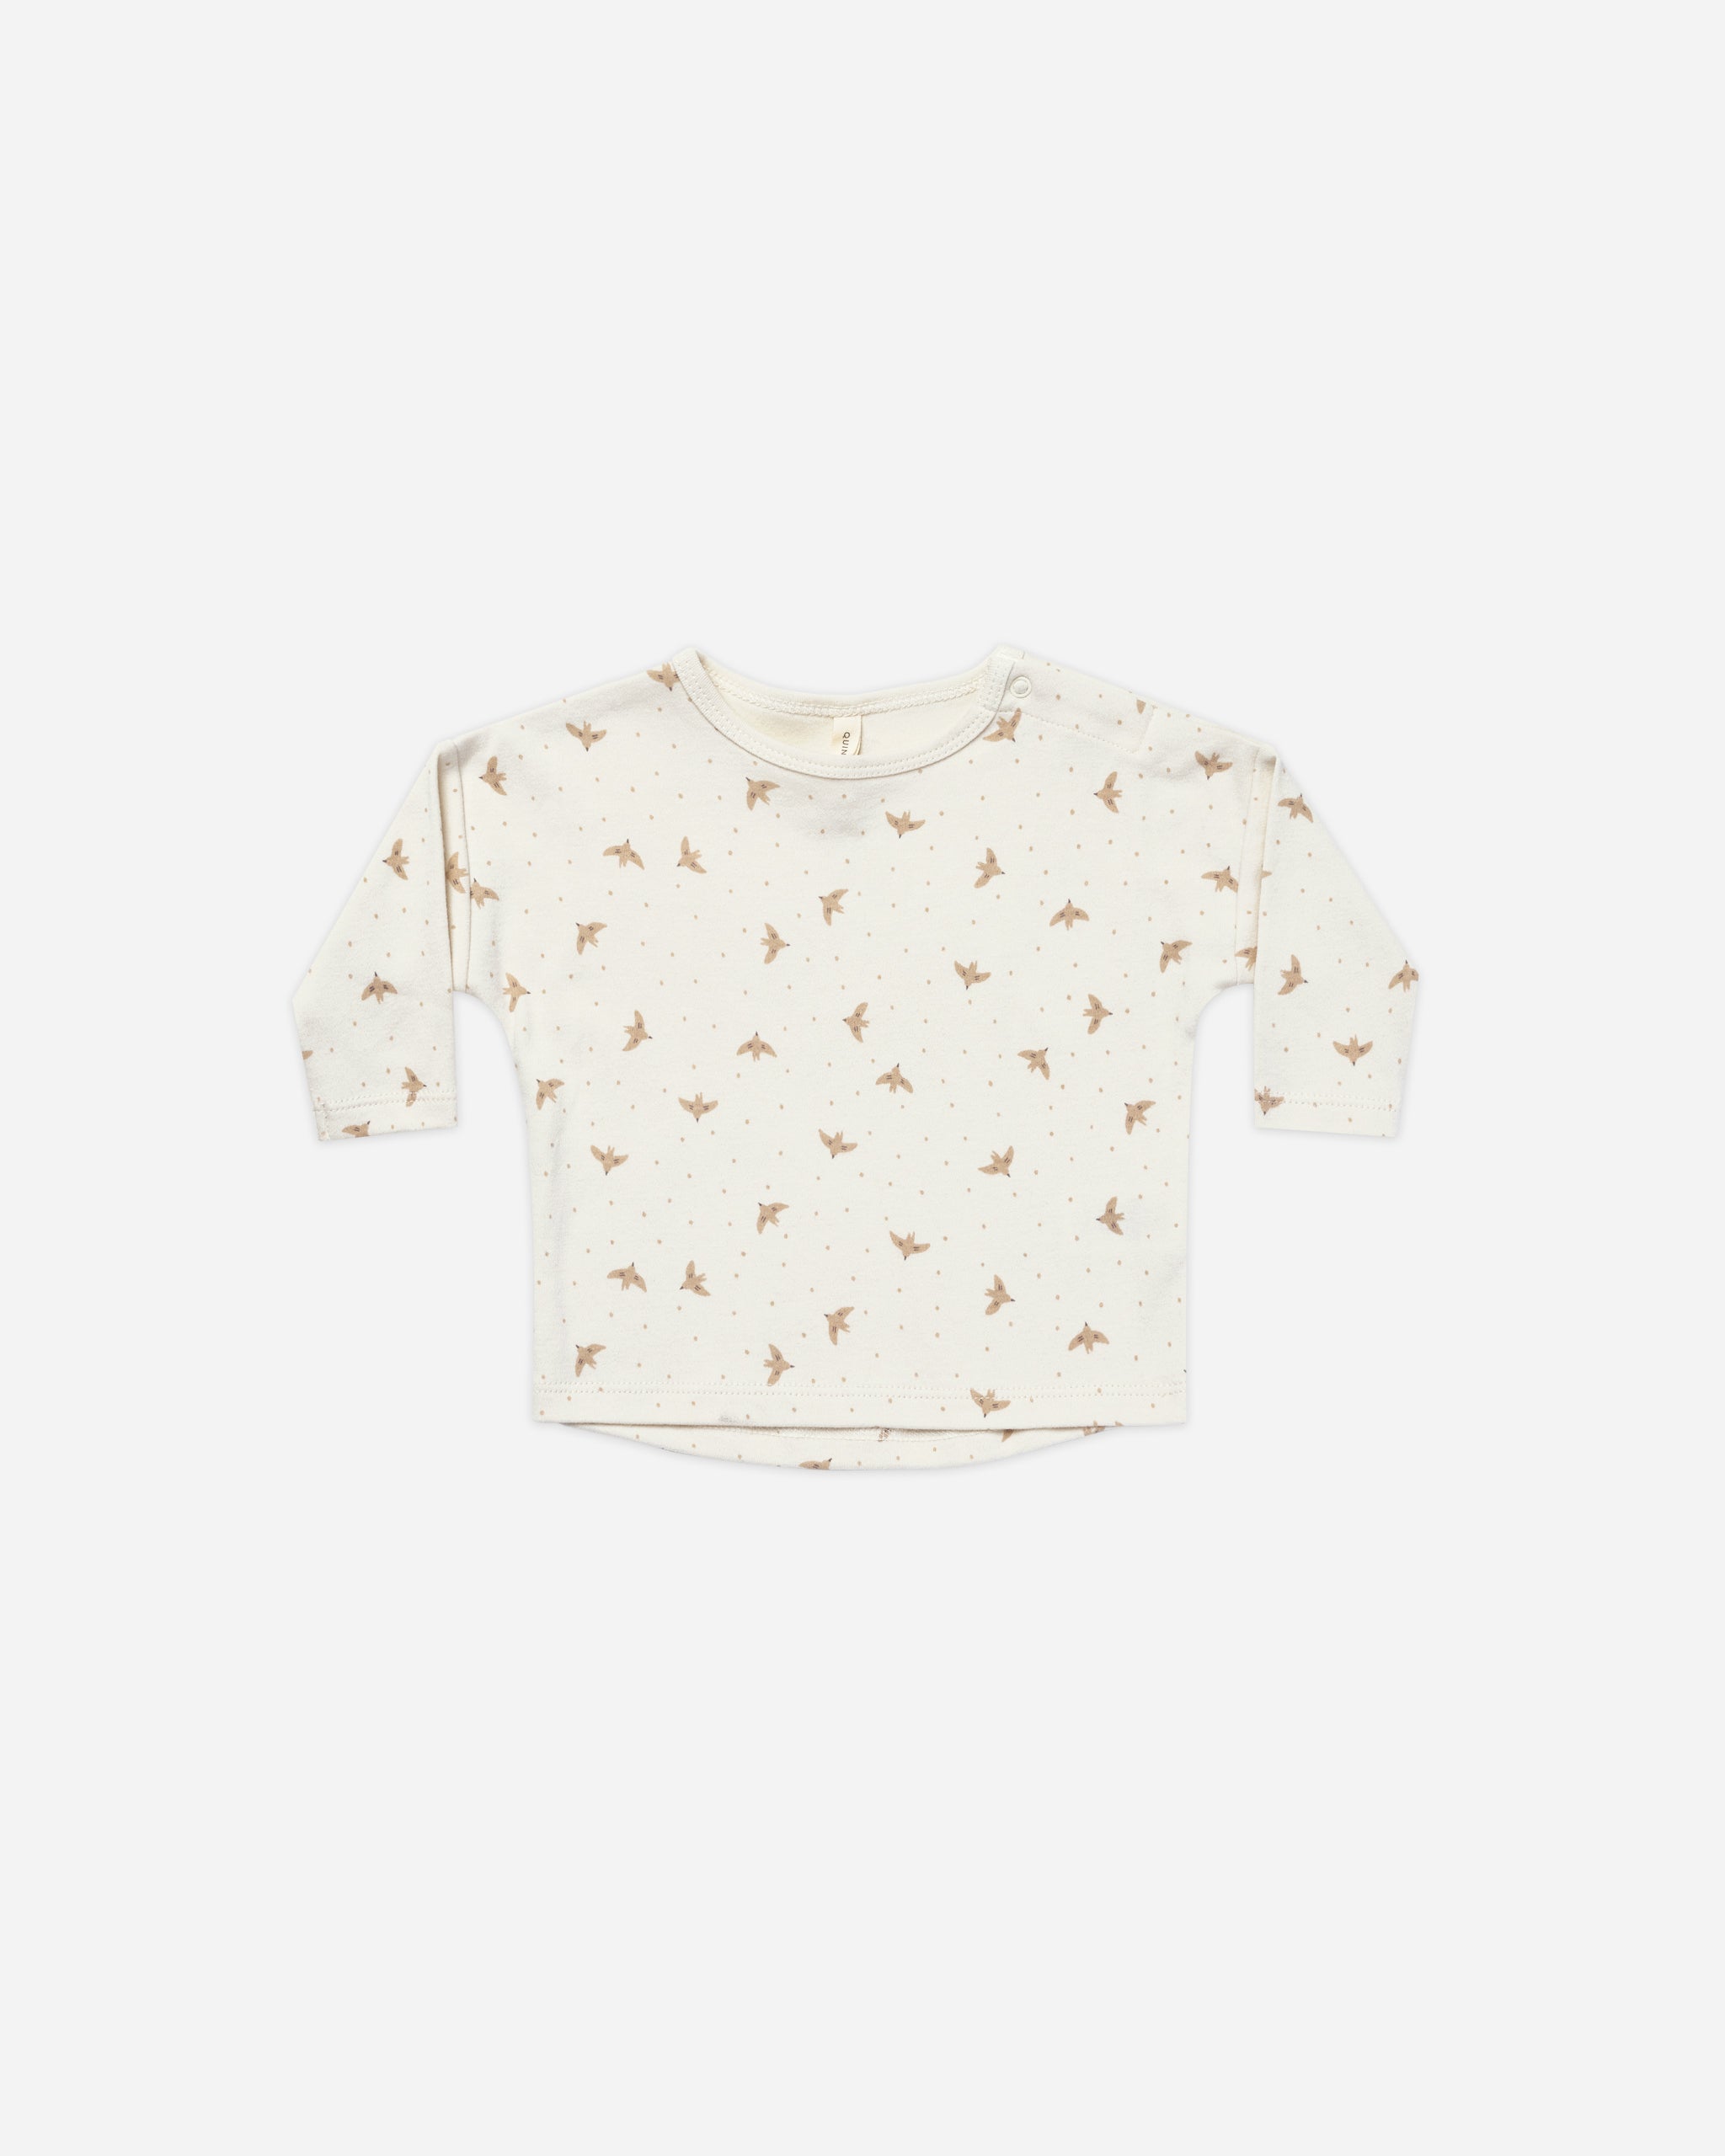 Long Sleeve Tee || Doves - Rylee + Cru | Kids Clothes | Trendy Baby Clothes | Modern Infant Outfits |